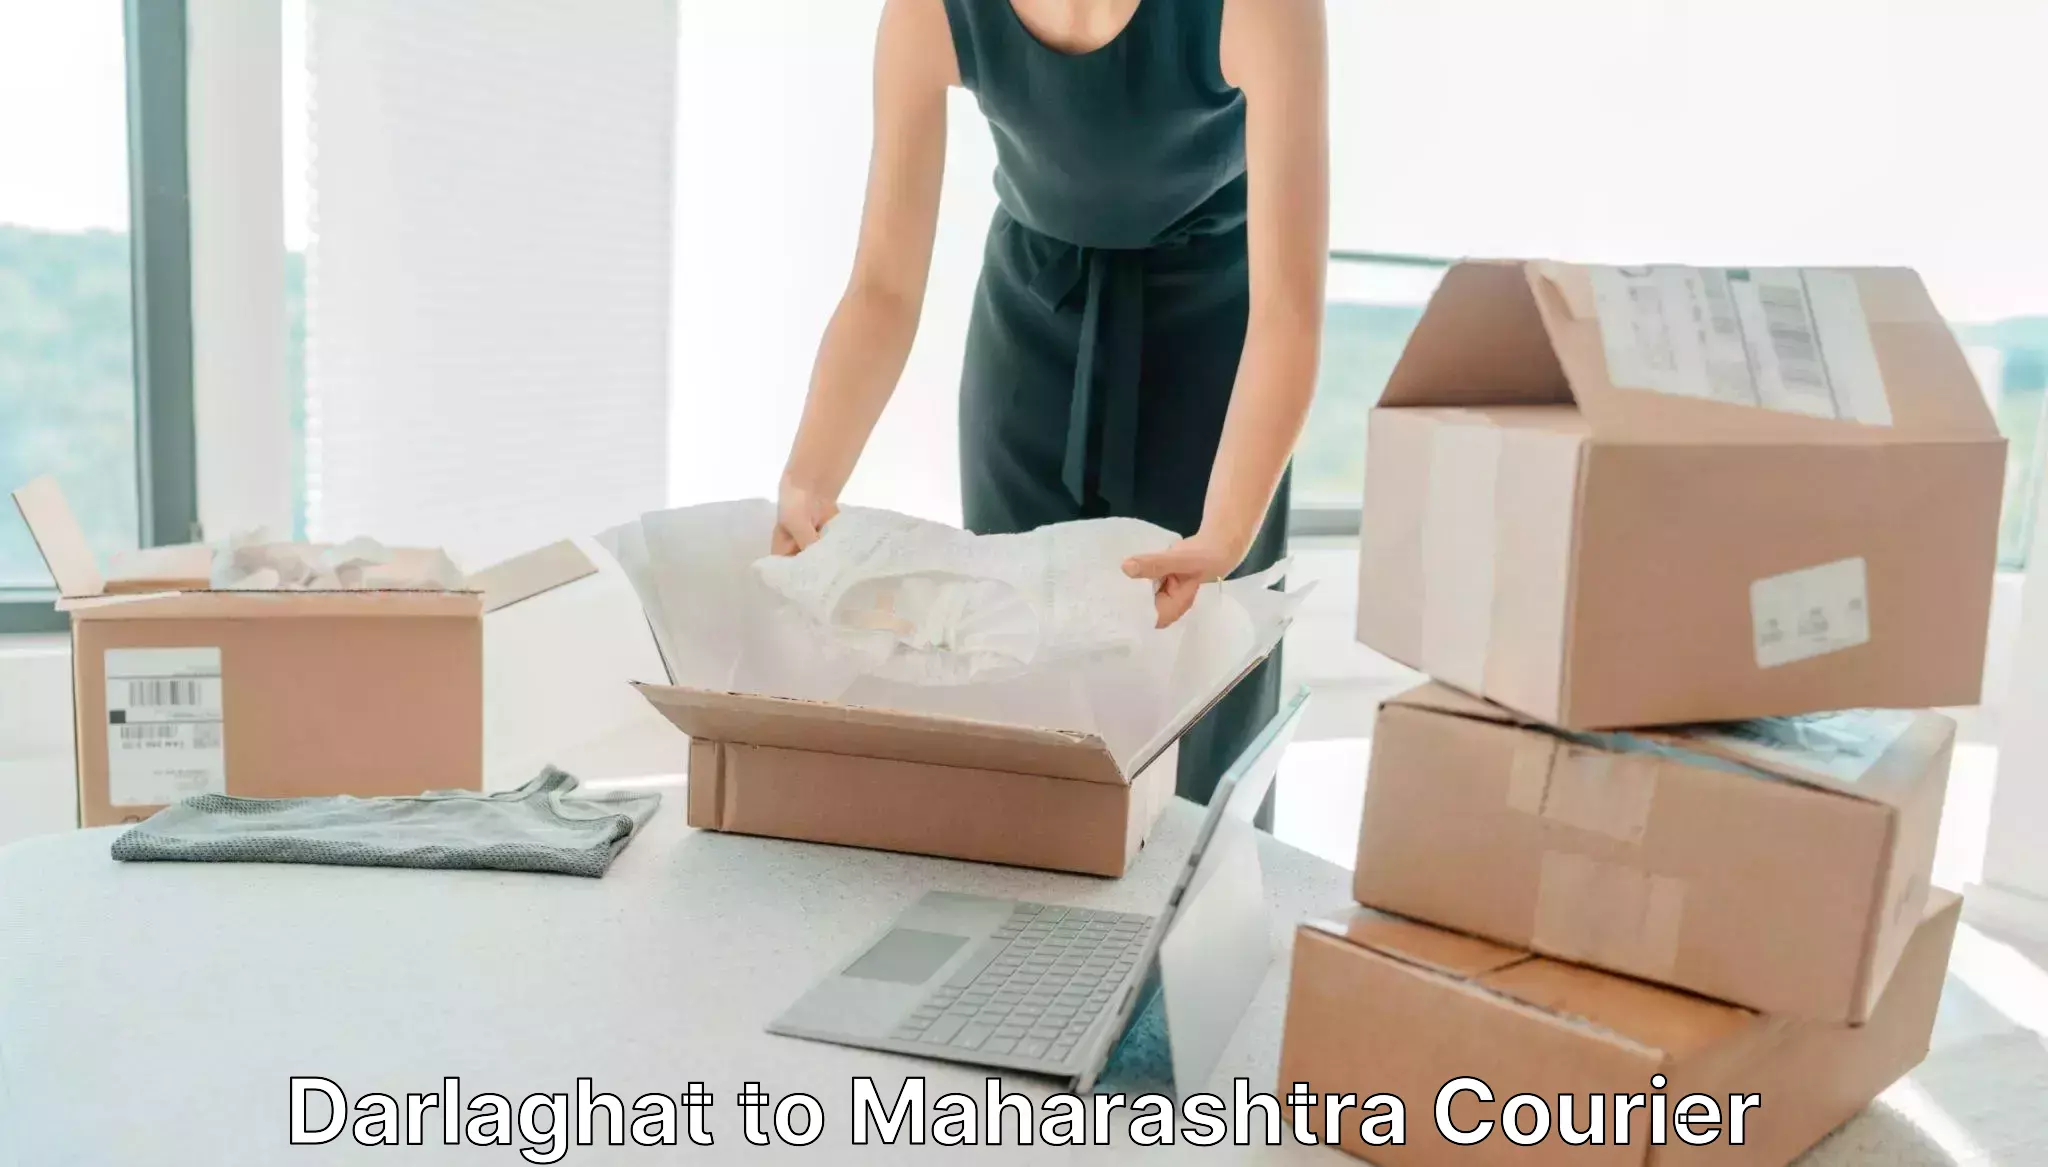 State-of-the-art courier technology Darlaghat to Maharashtra